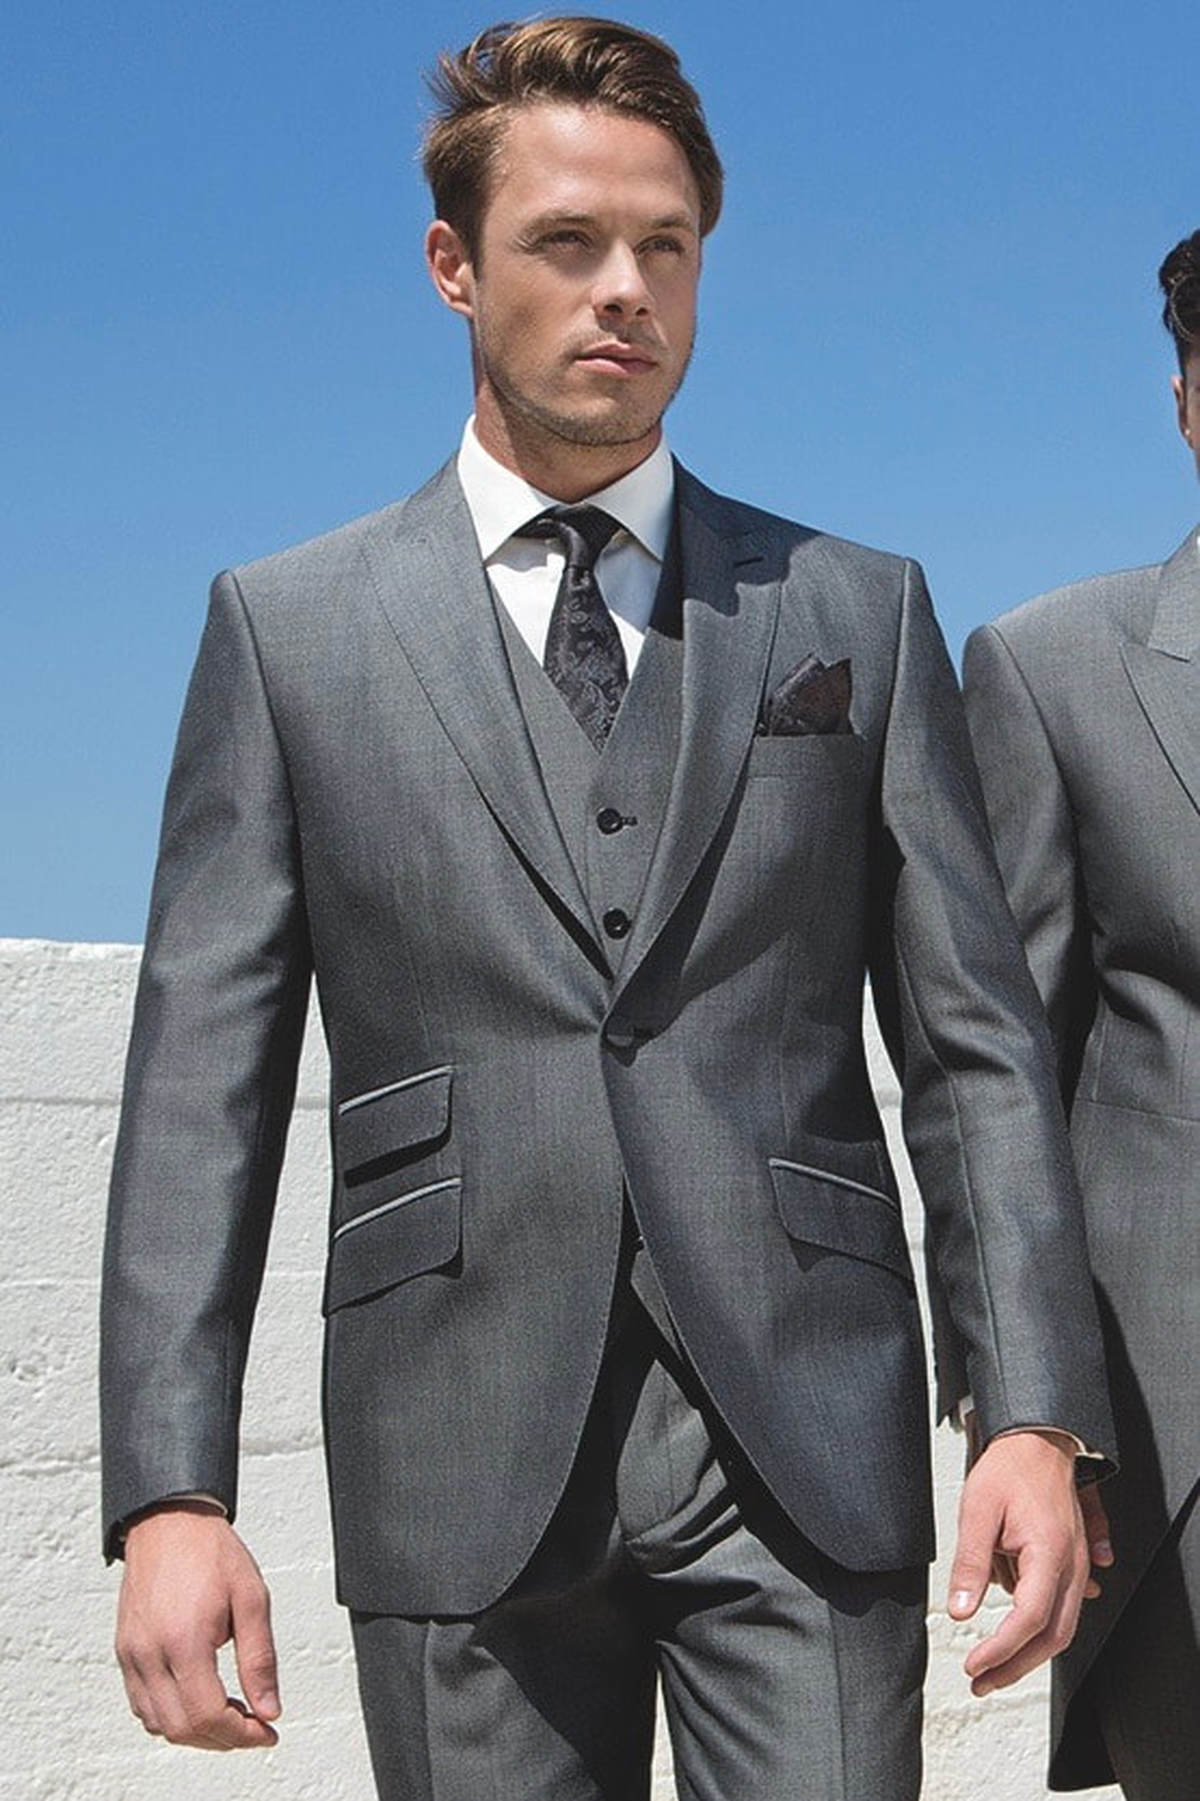 SILVER GREY TAILS OR SUIT HIRE - PARKERS FORMAL WEAR